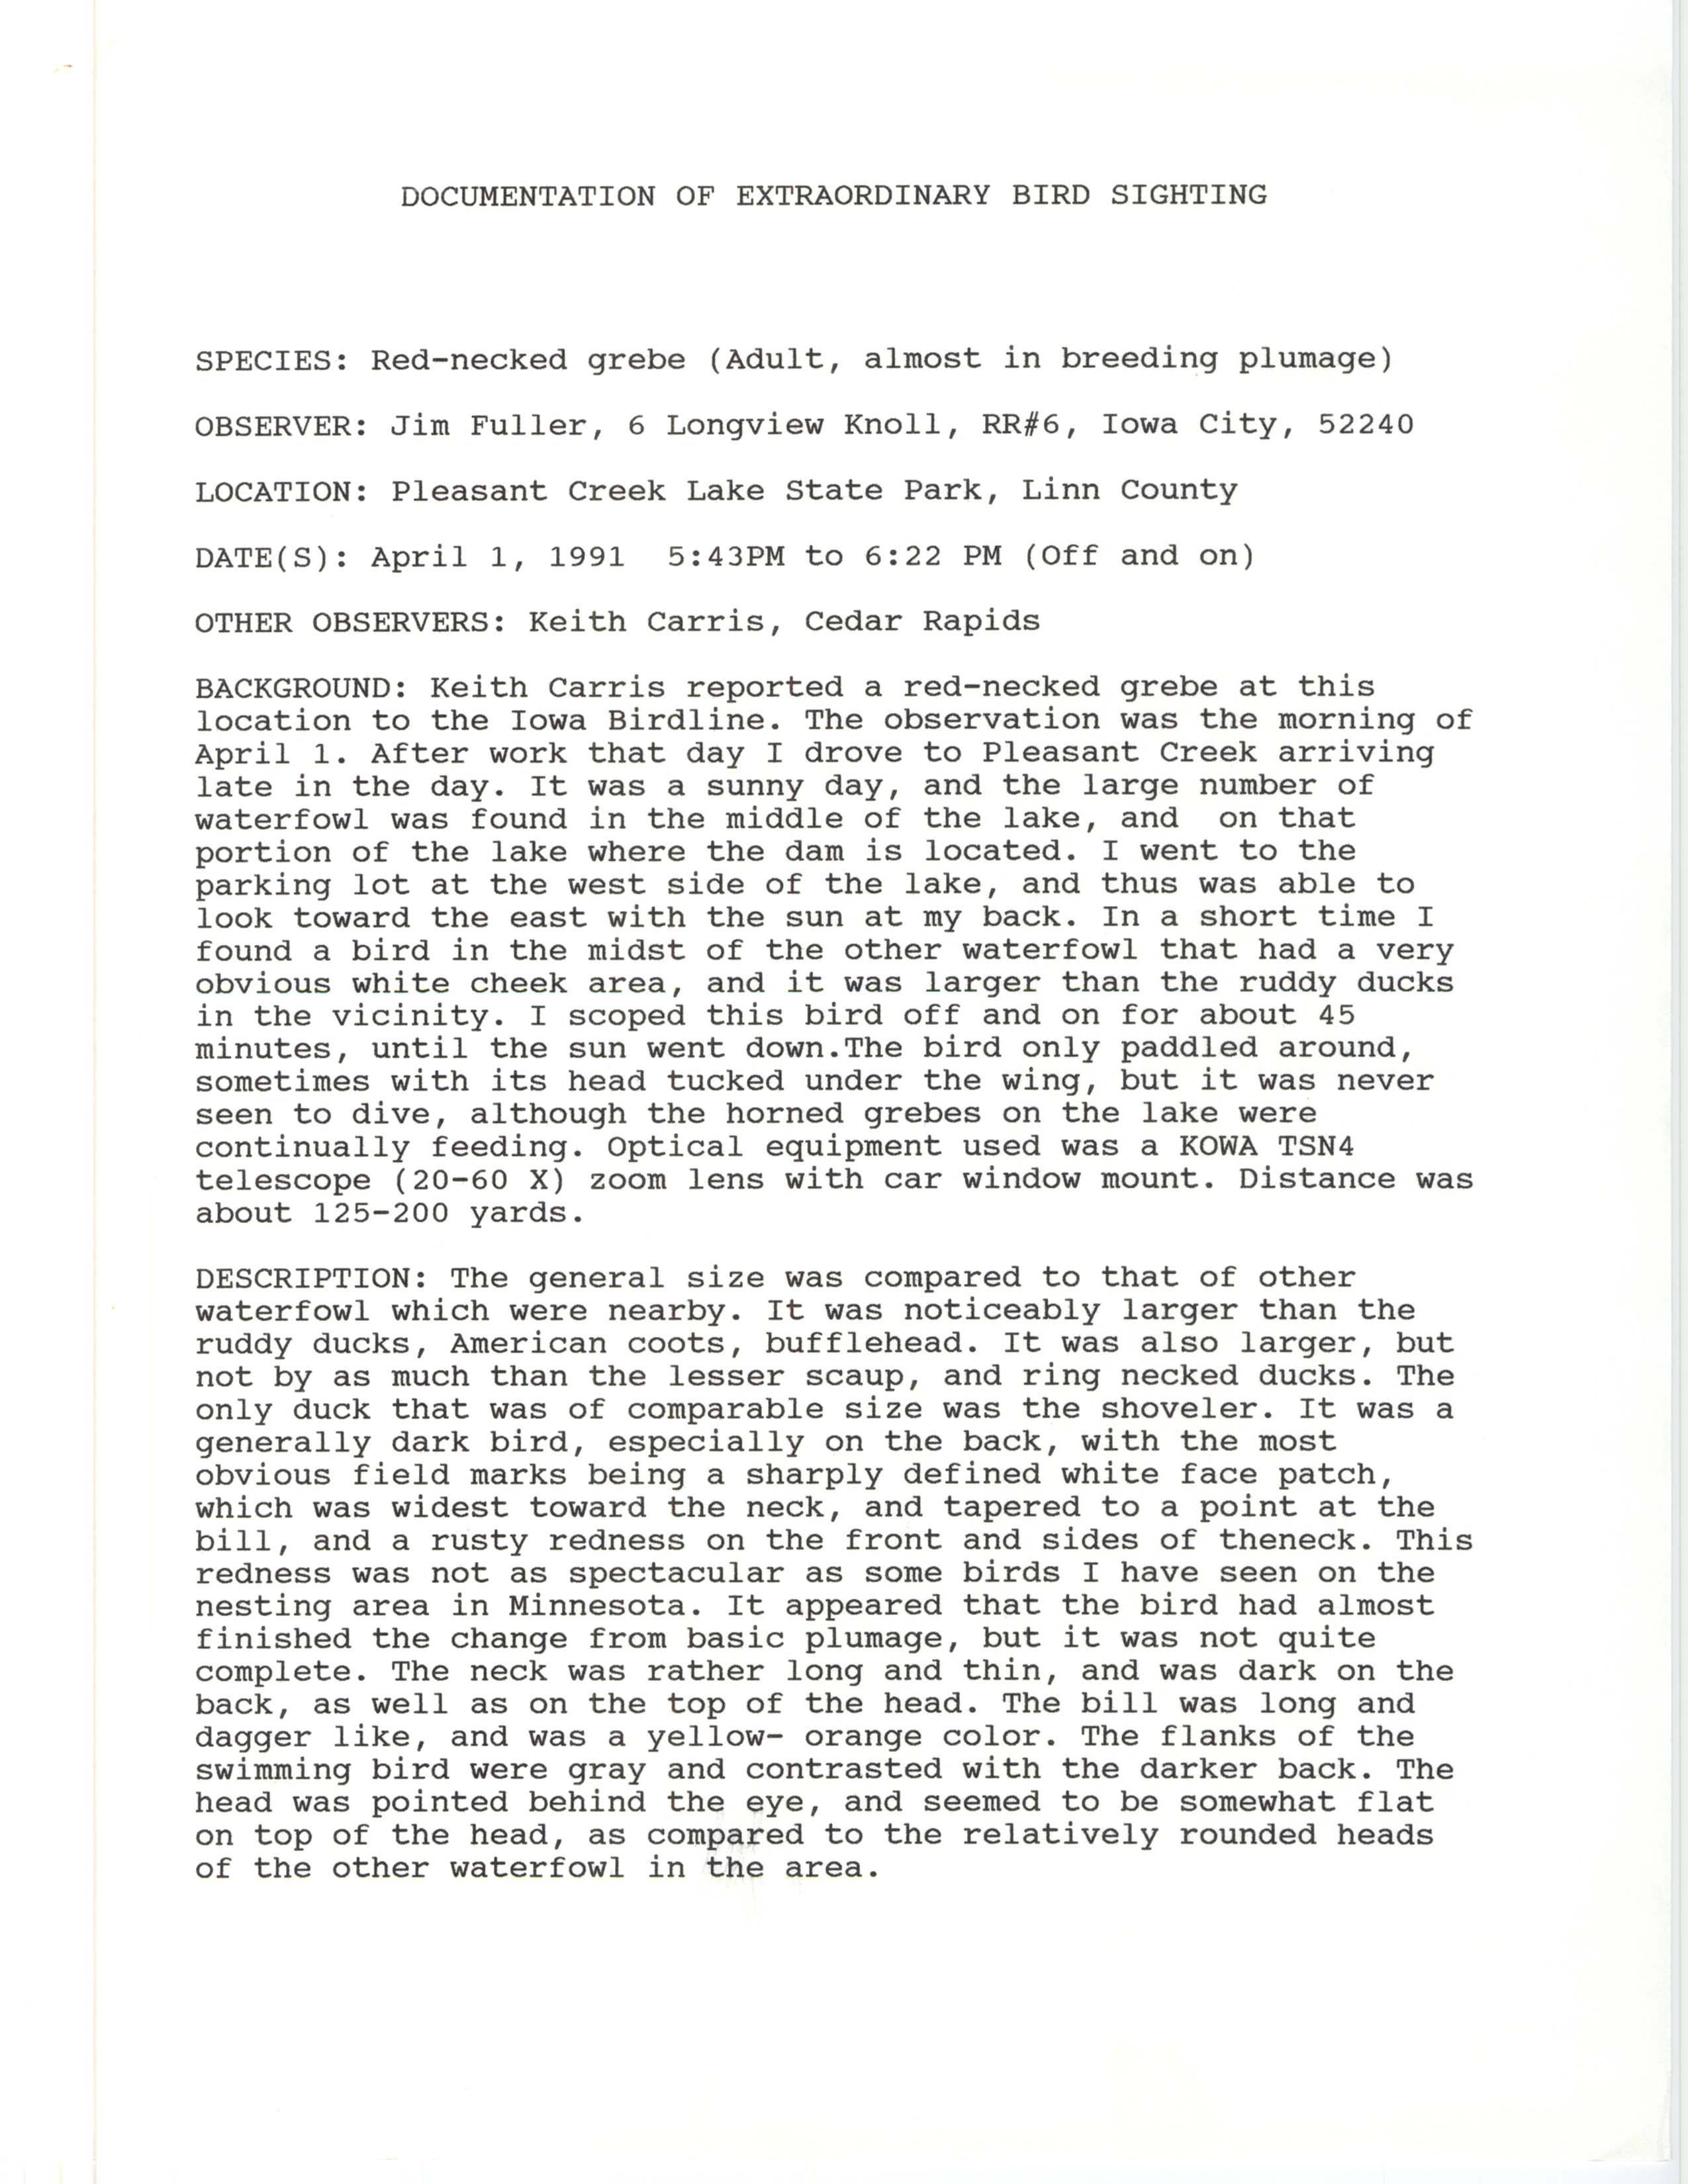 Rare bird documentation form for Red-necked Grebe at Pleasant Creek Lake State Park, 1991